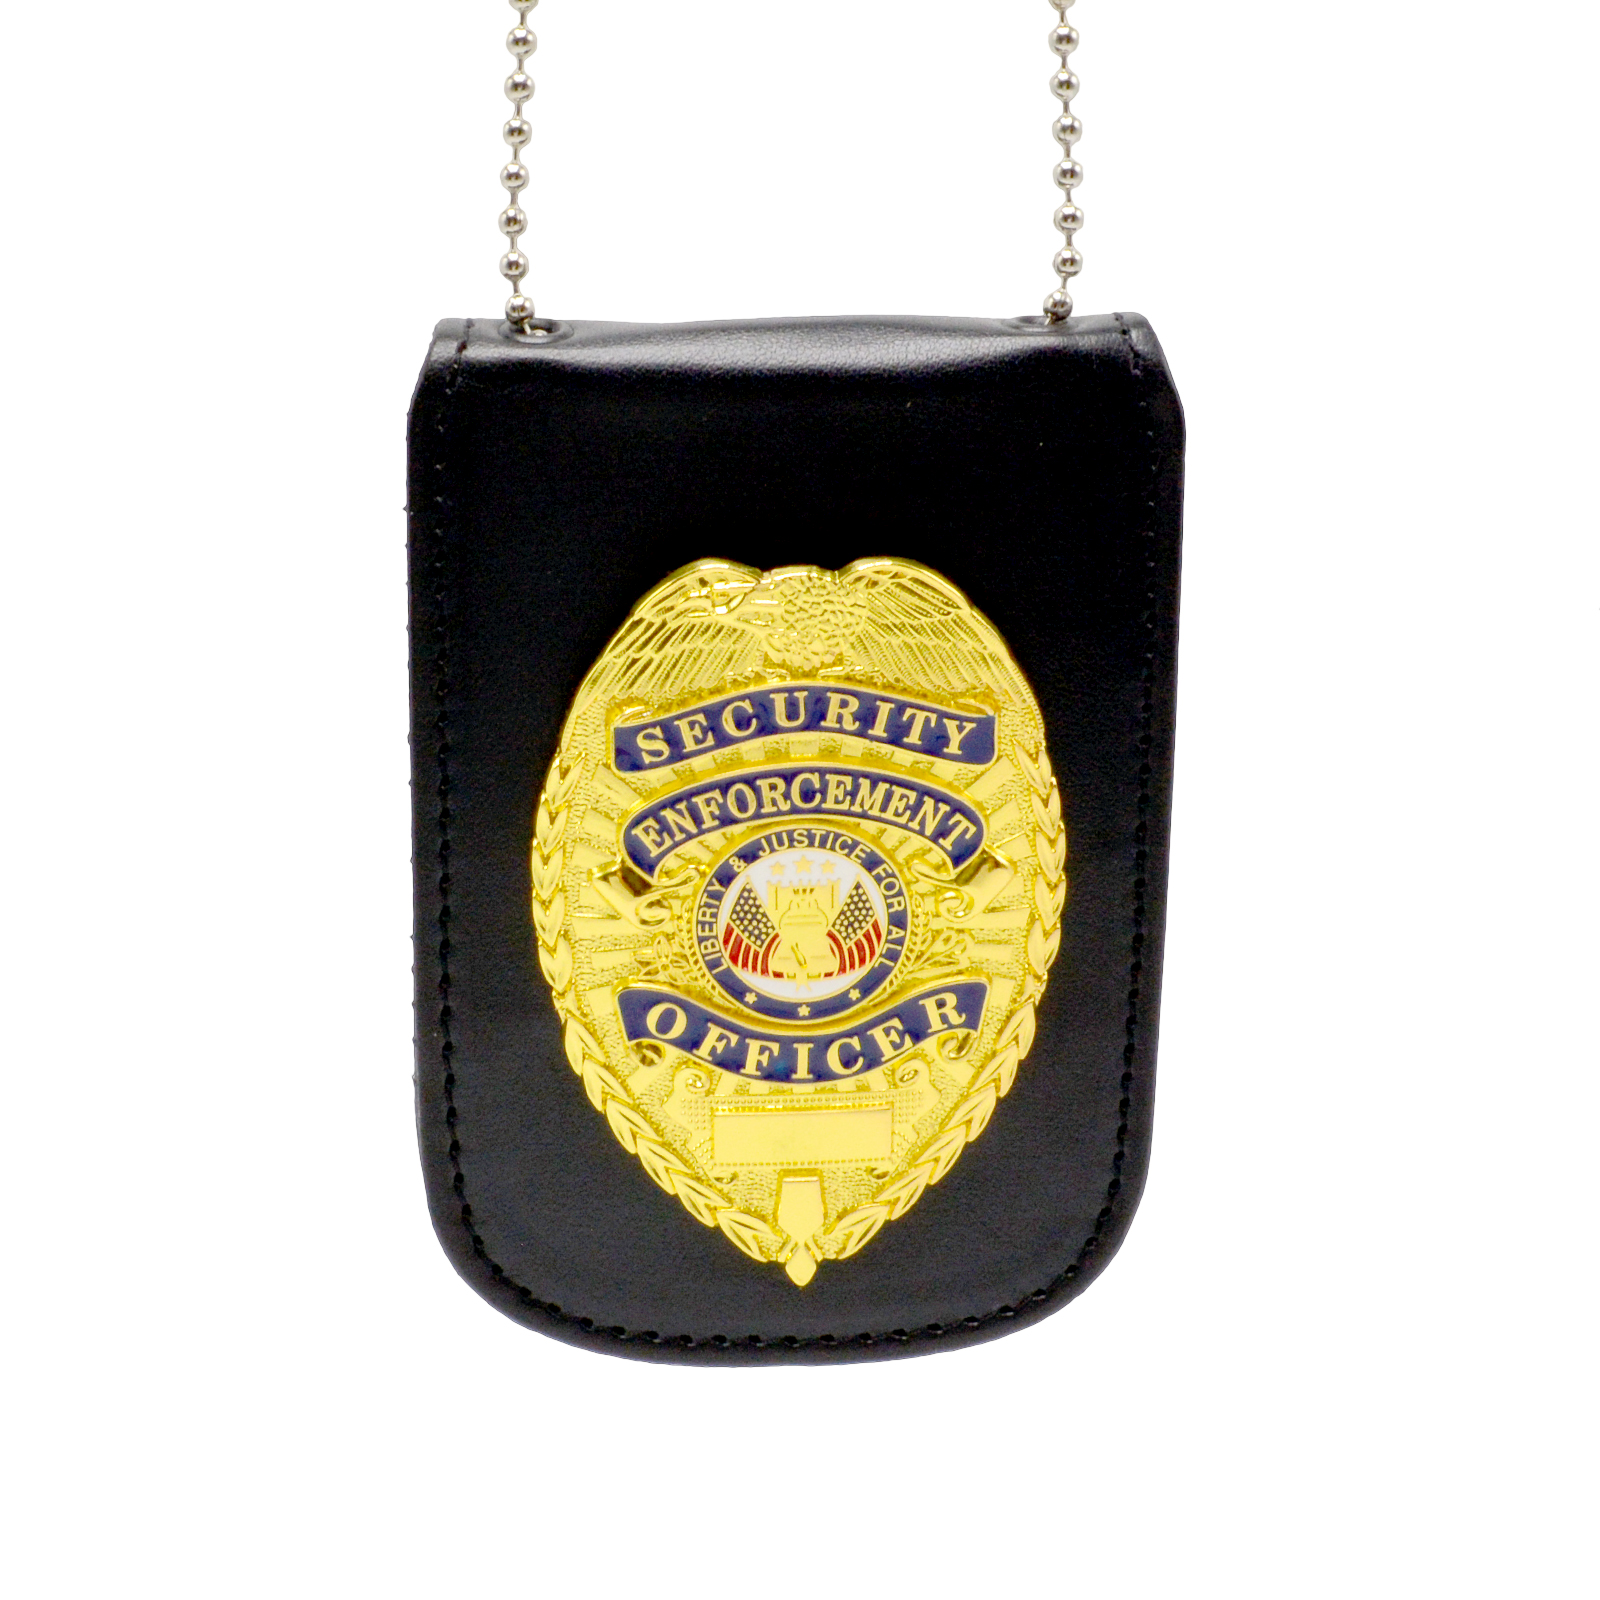 Security Enforcement Officer Retractable ID Badge Holder